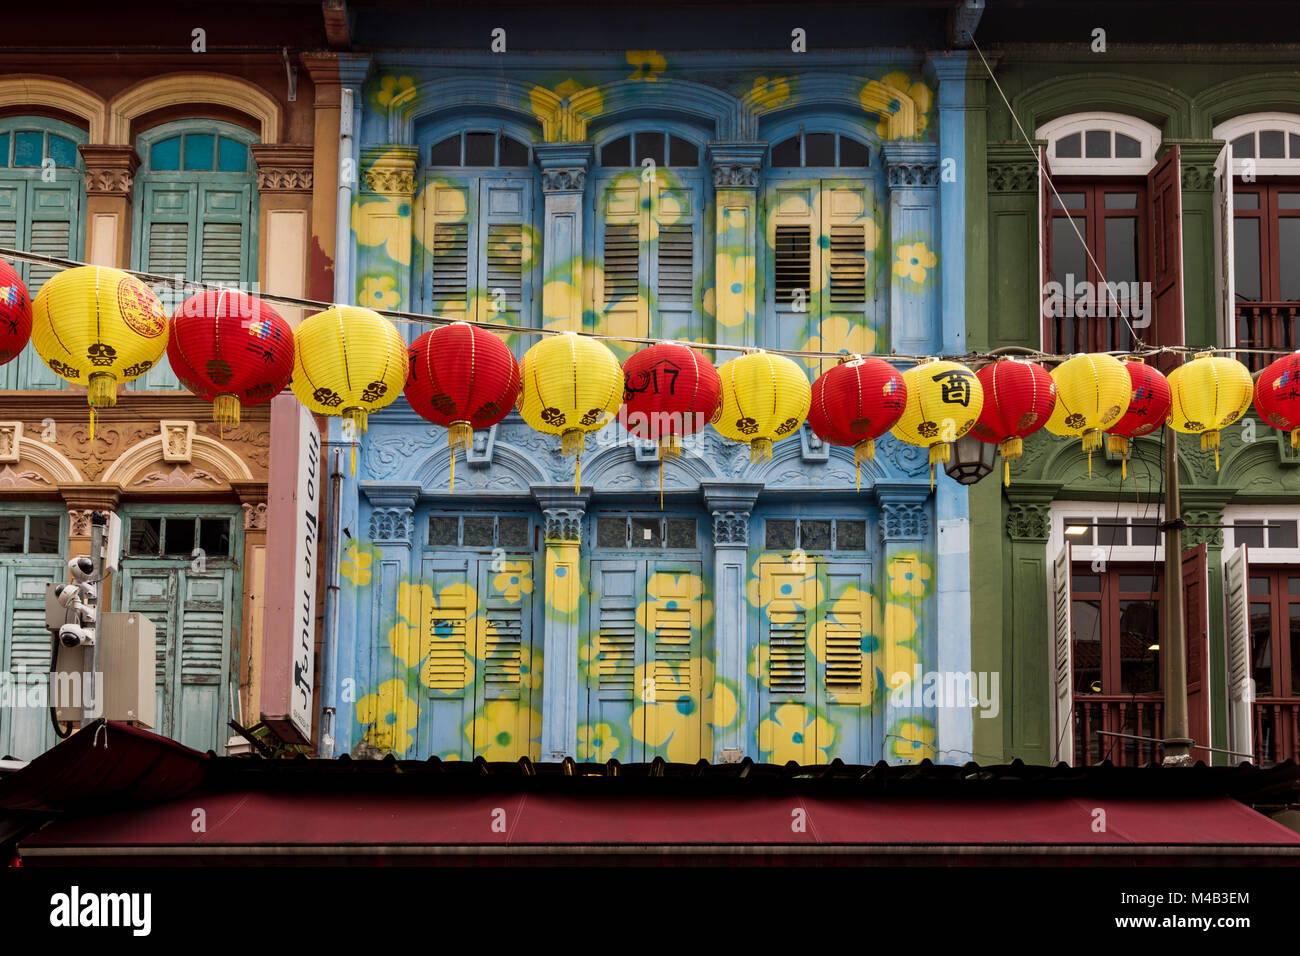 Singapore,Chinatown,street decoration,lampions in yellow and red over the street in front of coloured house facade Stock Photo